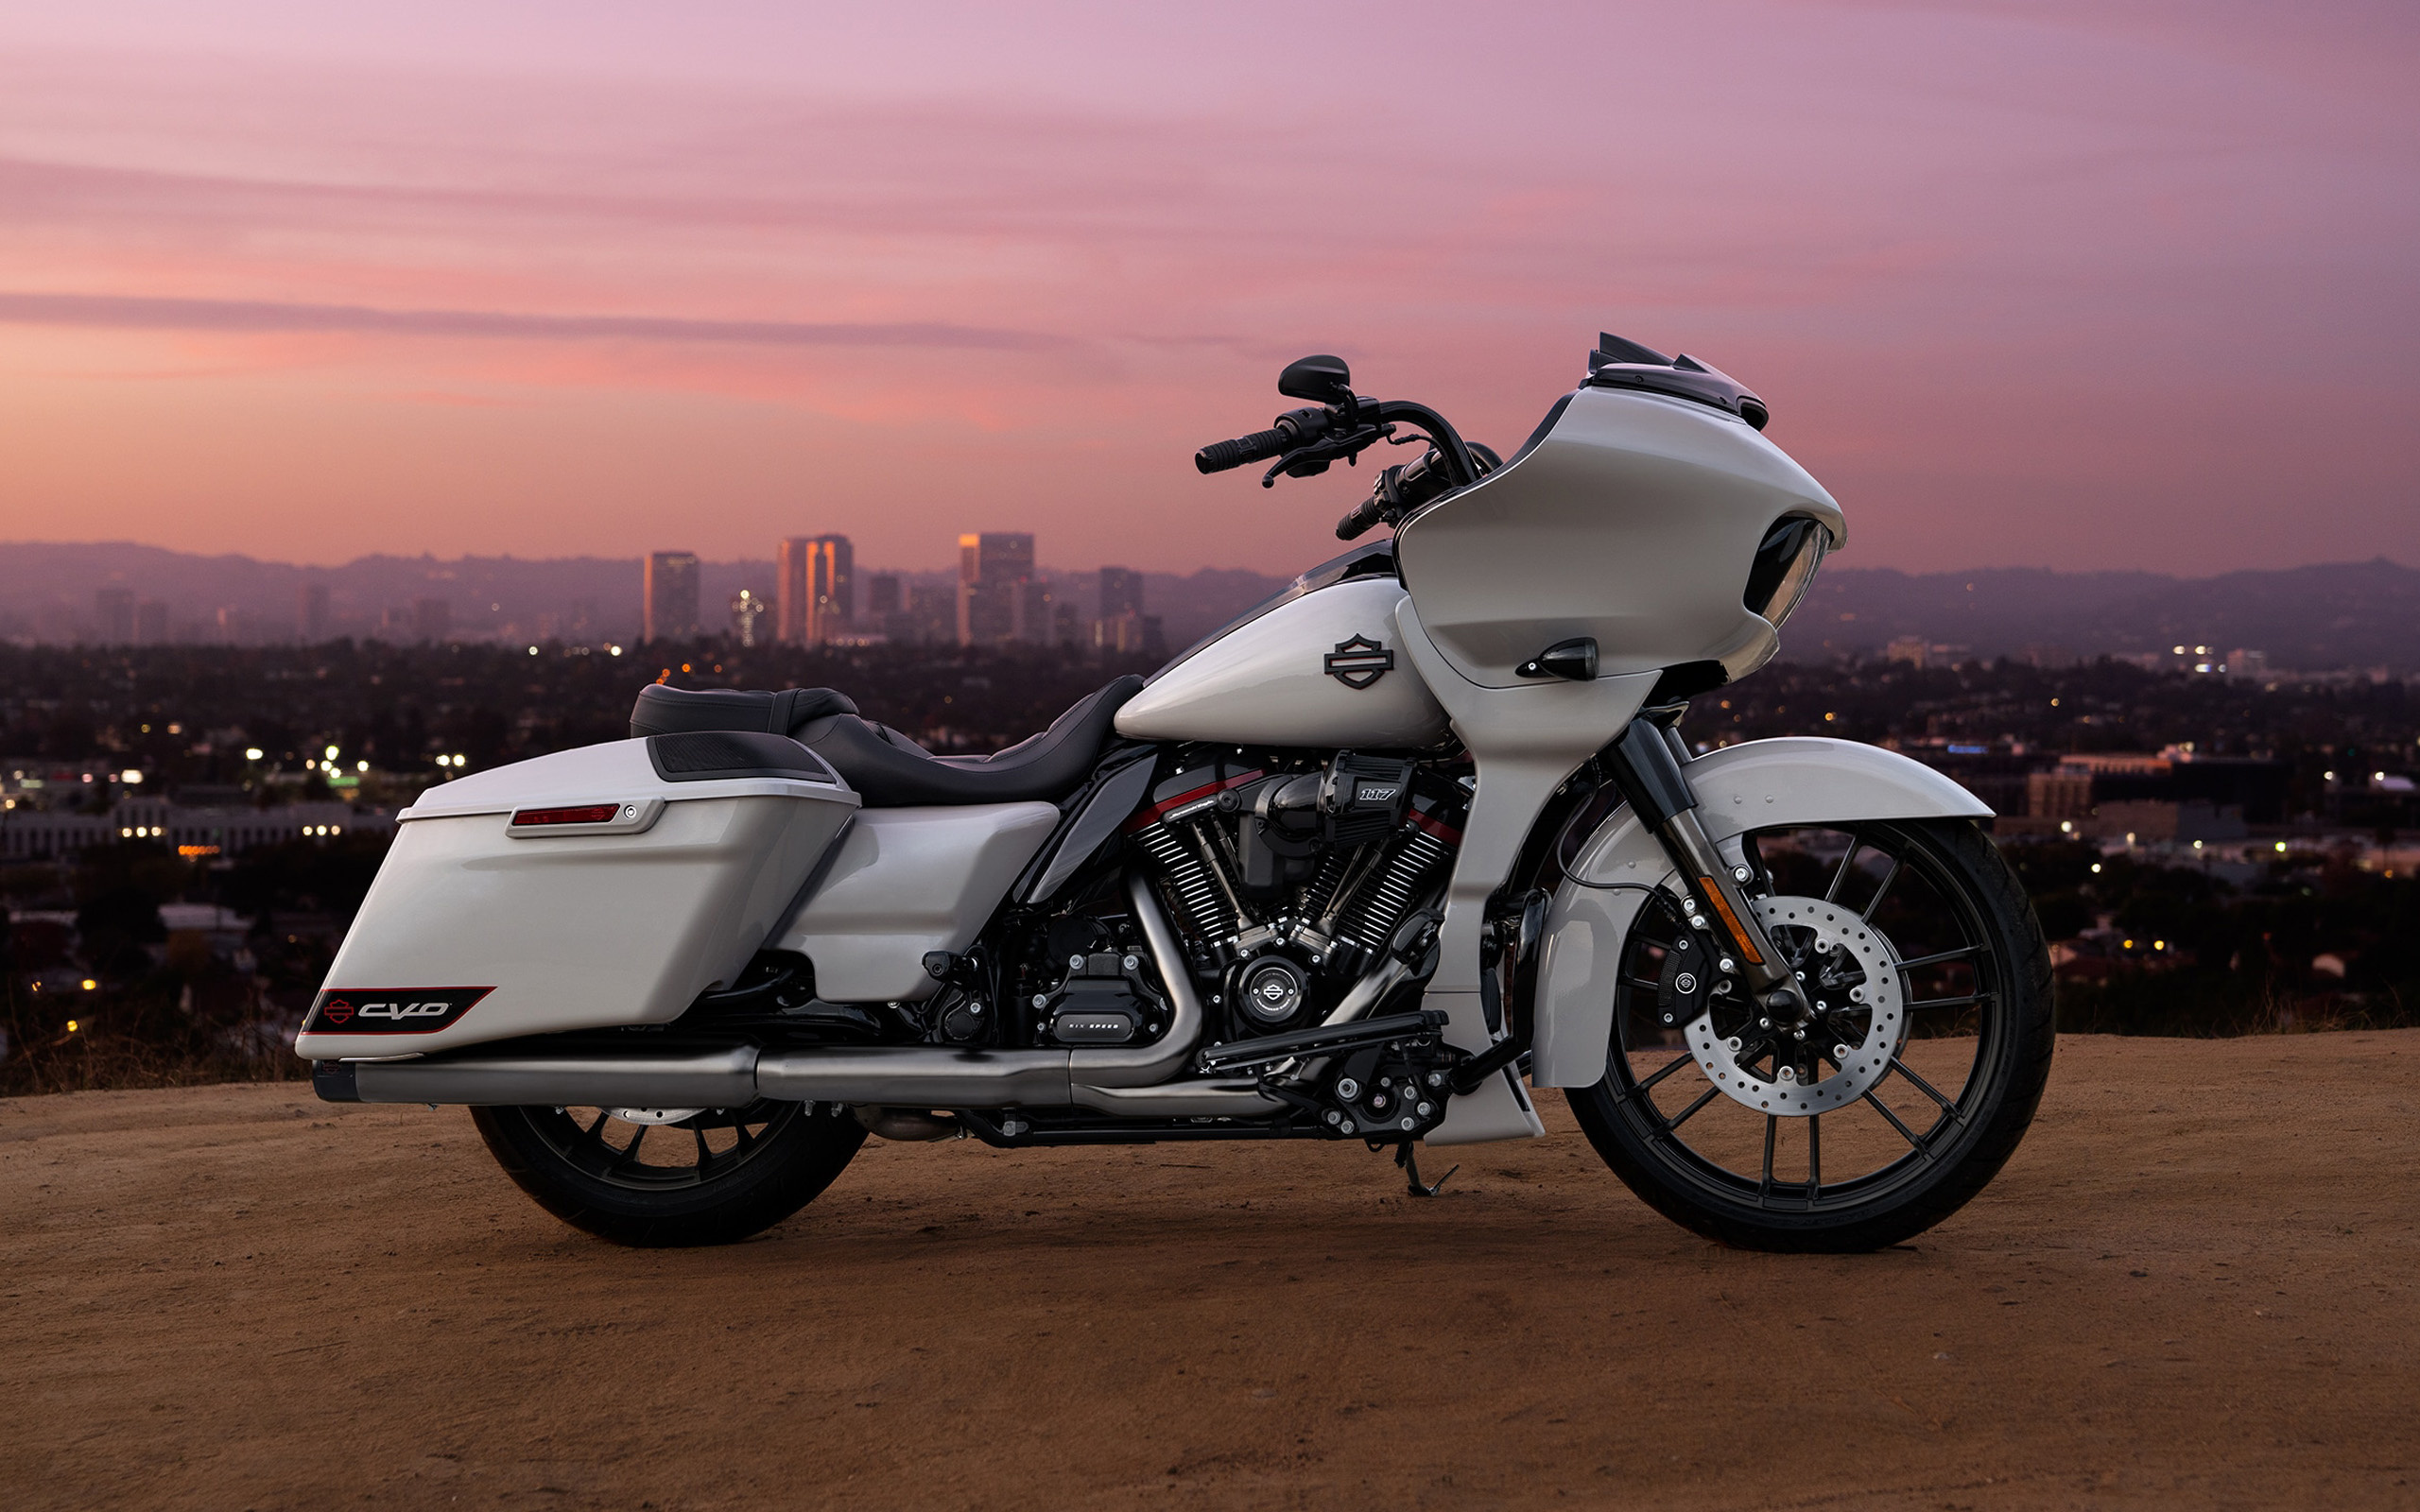 Harley-Davidson Road Glide, Stunning sunset view, Superbike excellence, Ultimate American motorcycles, 2560x1600 HD Desktop